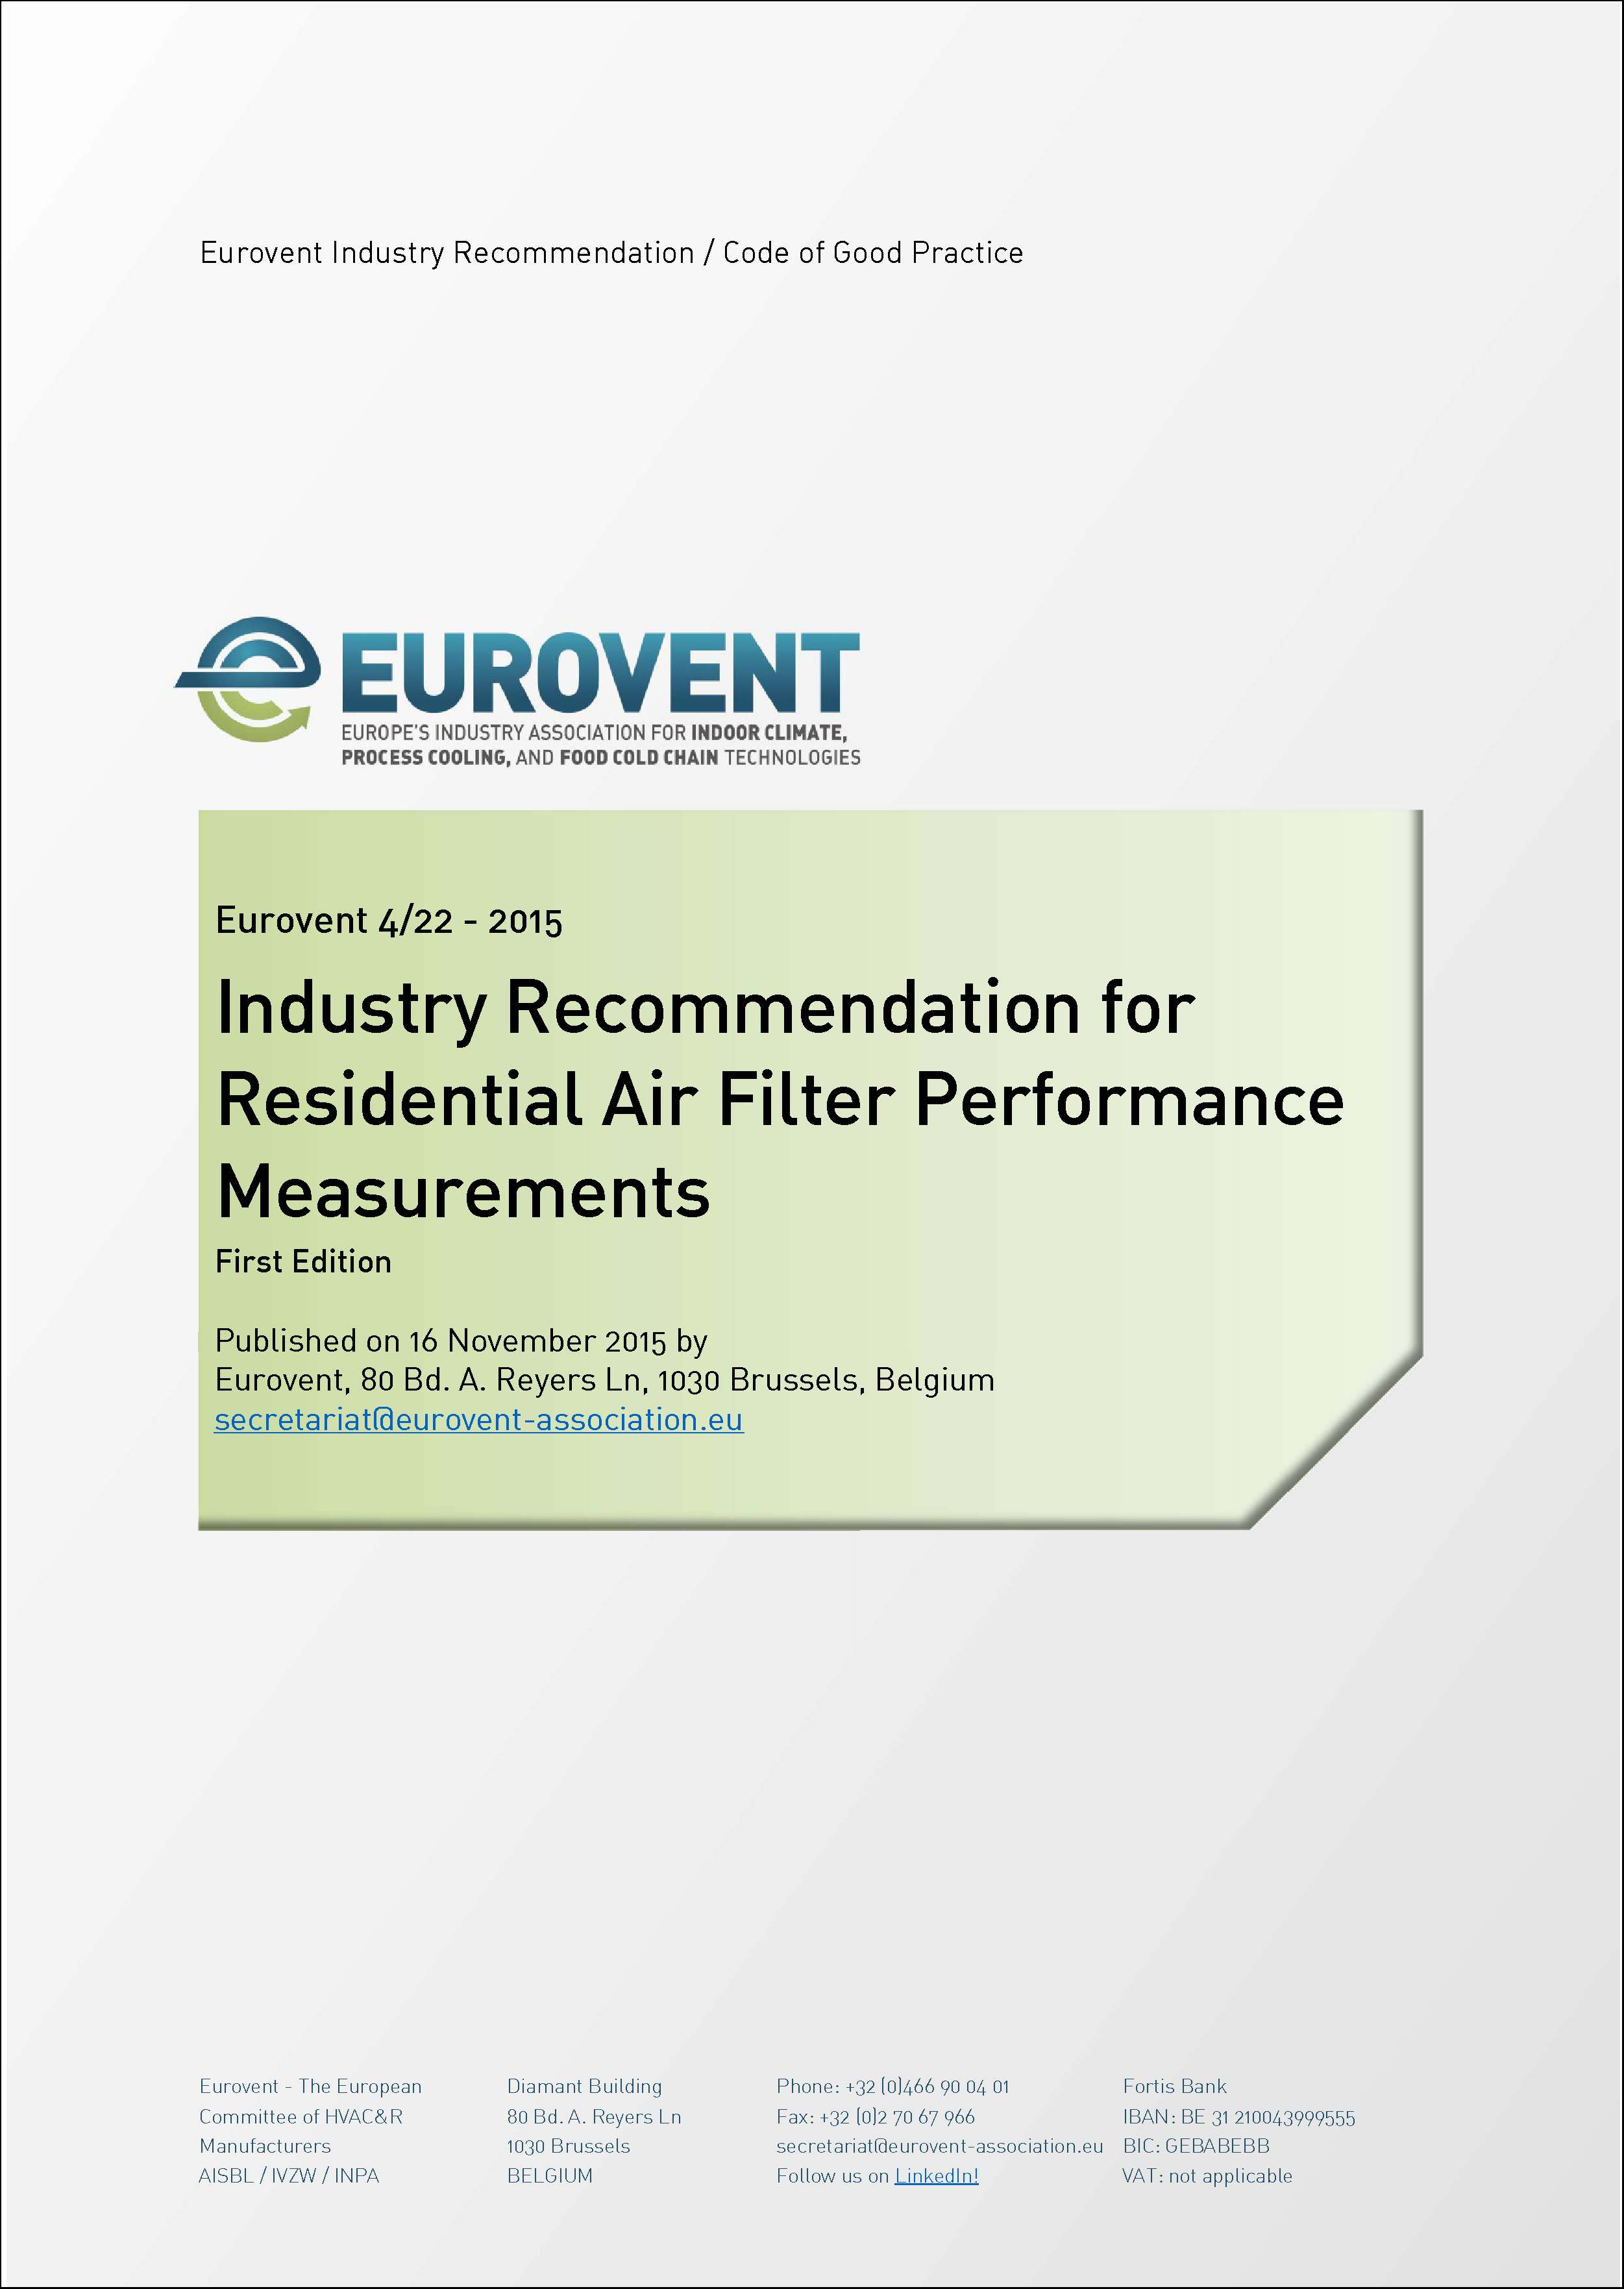 2015 - Industry Recommendation for Residential Air Filter Performance Measurements